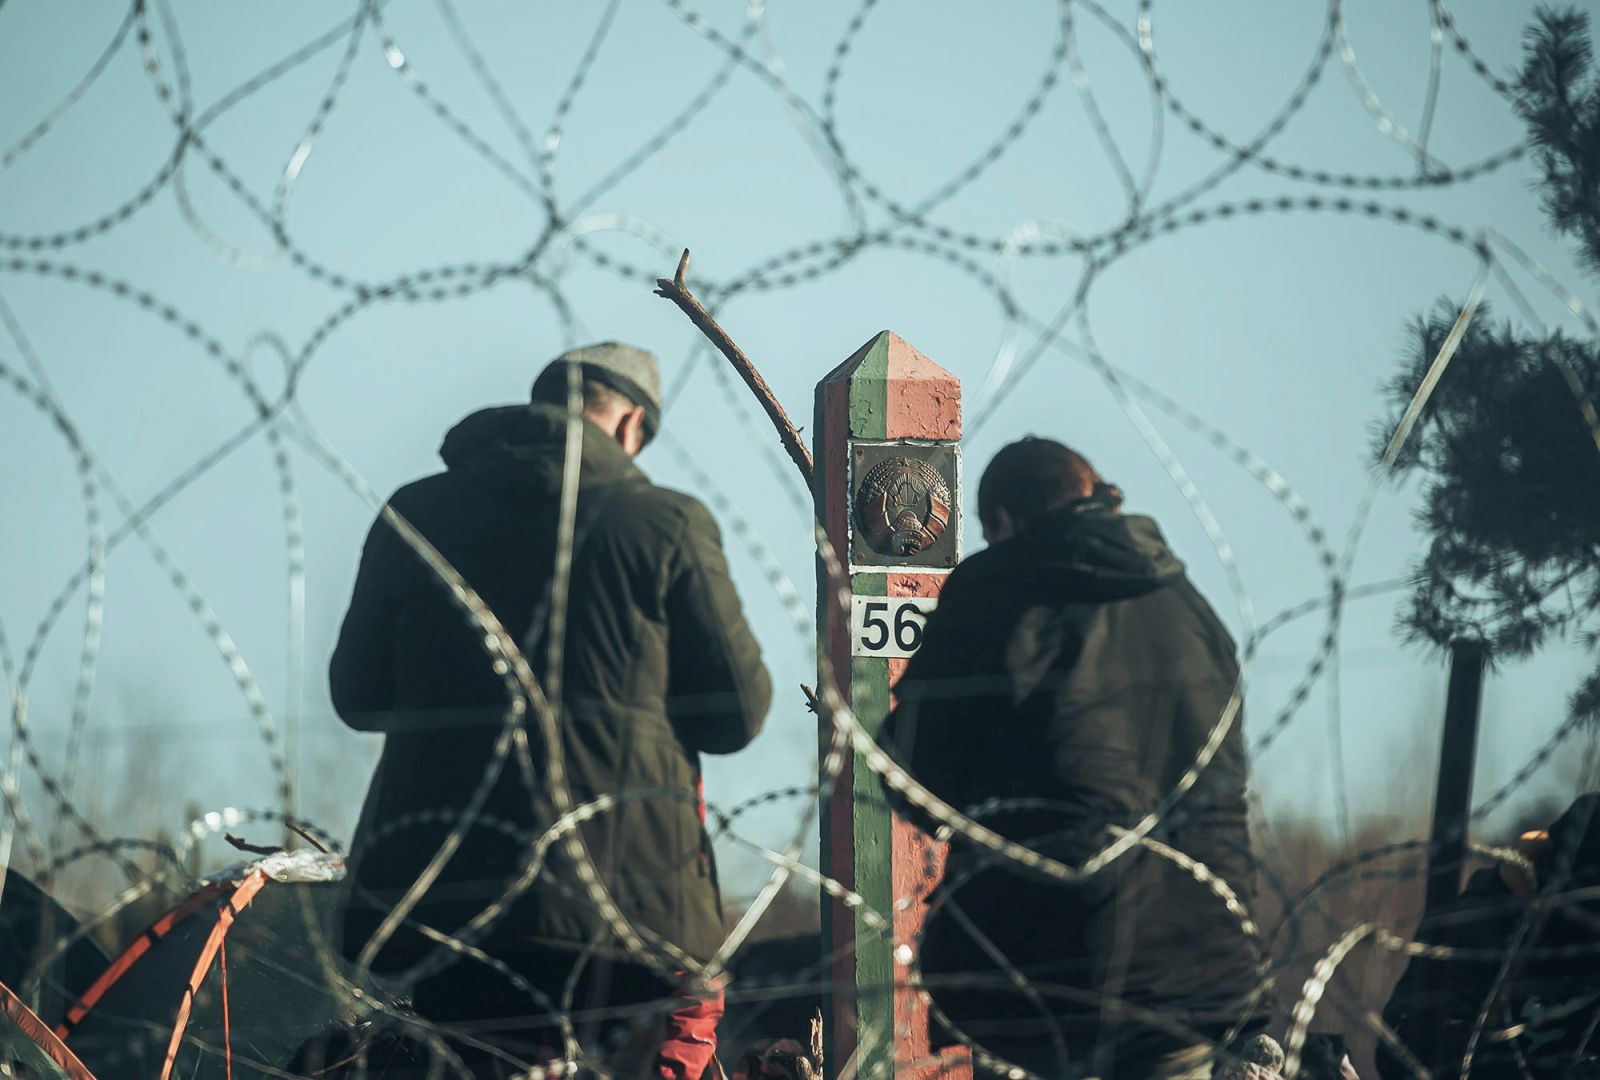 epa09578274 A handout photo made available by Polish Territorial Defence Force shows migrants behind the border fence in Belarus near the Polish-Belarusian border crossing in Kuznica, eastern Poland, 09 November 2021 (issued 12 November 2021). According to Polish Border Guard, over a thousand refugees, who want to obtain asylum in the European Union have been trapped at low temperatures at the border Polish-Belarusian border.  EPA/IREK DOROZANSKI / POLISH TERRITORIAL DEFENCE FORCE / HANDOUT POLAND OUT HANDOUT EDITORIAL USE ONLY/NO SALES